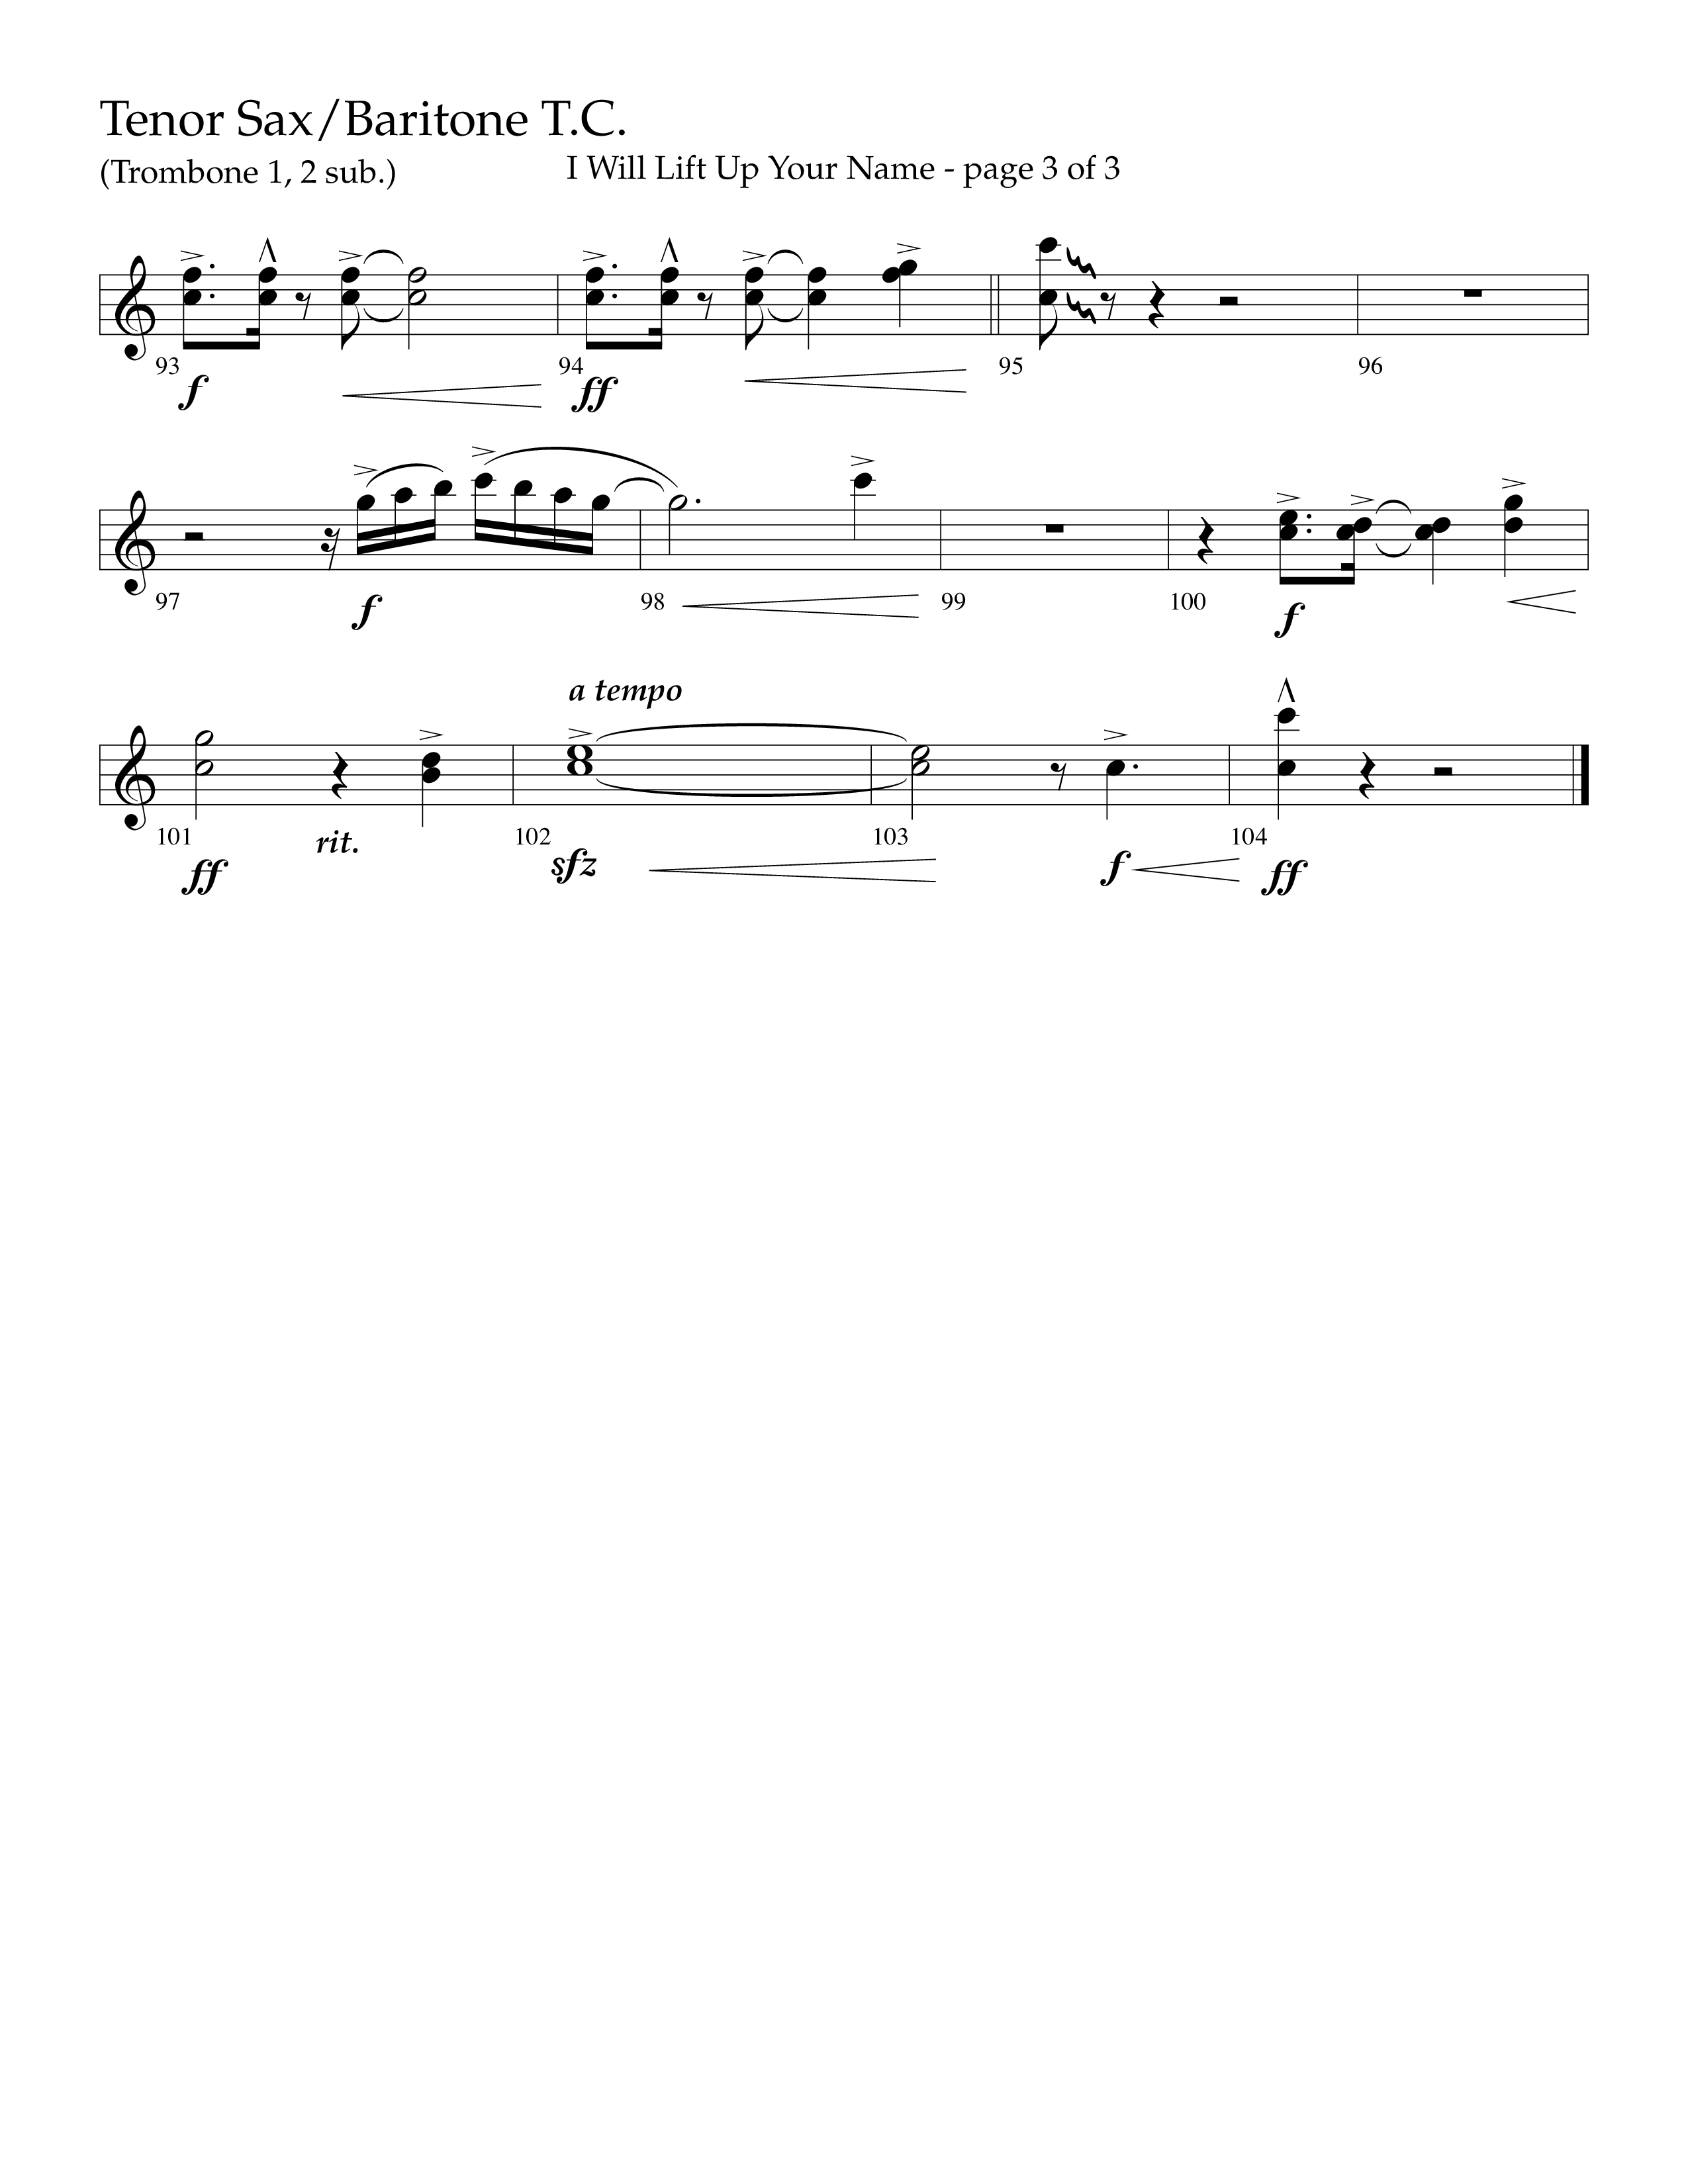 I Will Lift Up Your Name (Choral Anthem SATB) Tenor Sax/Baritone T.C. (Lifeway Choral / Arr. John Bolin / Orch. Cliff Duren)